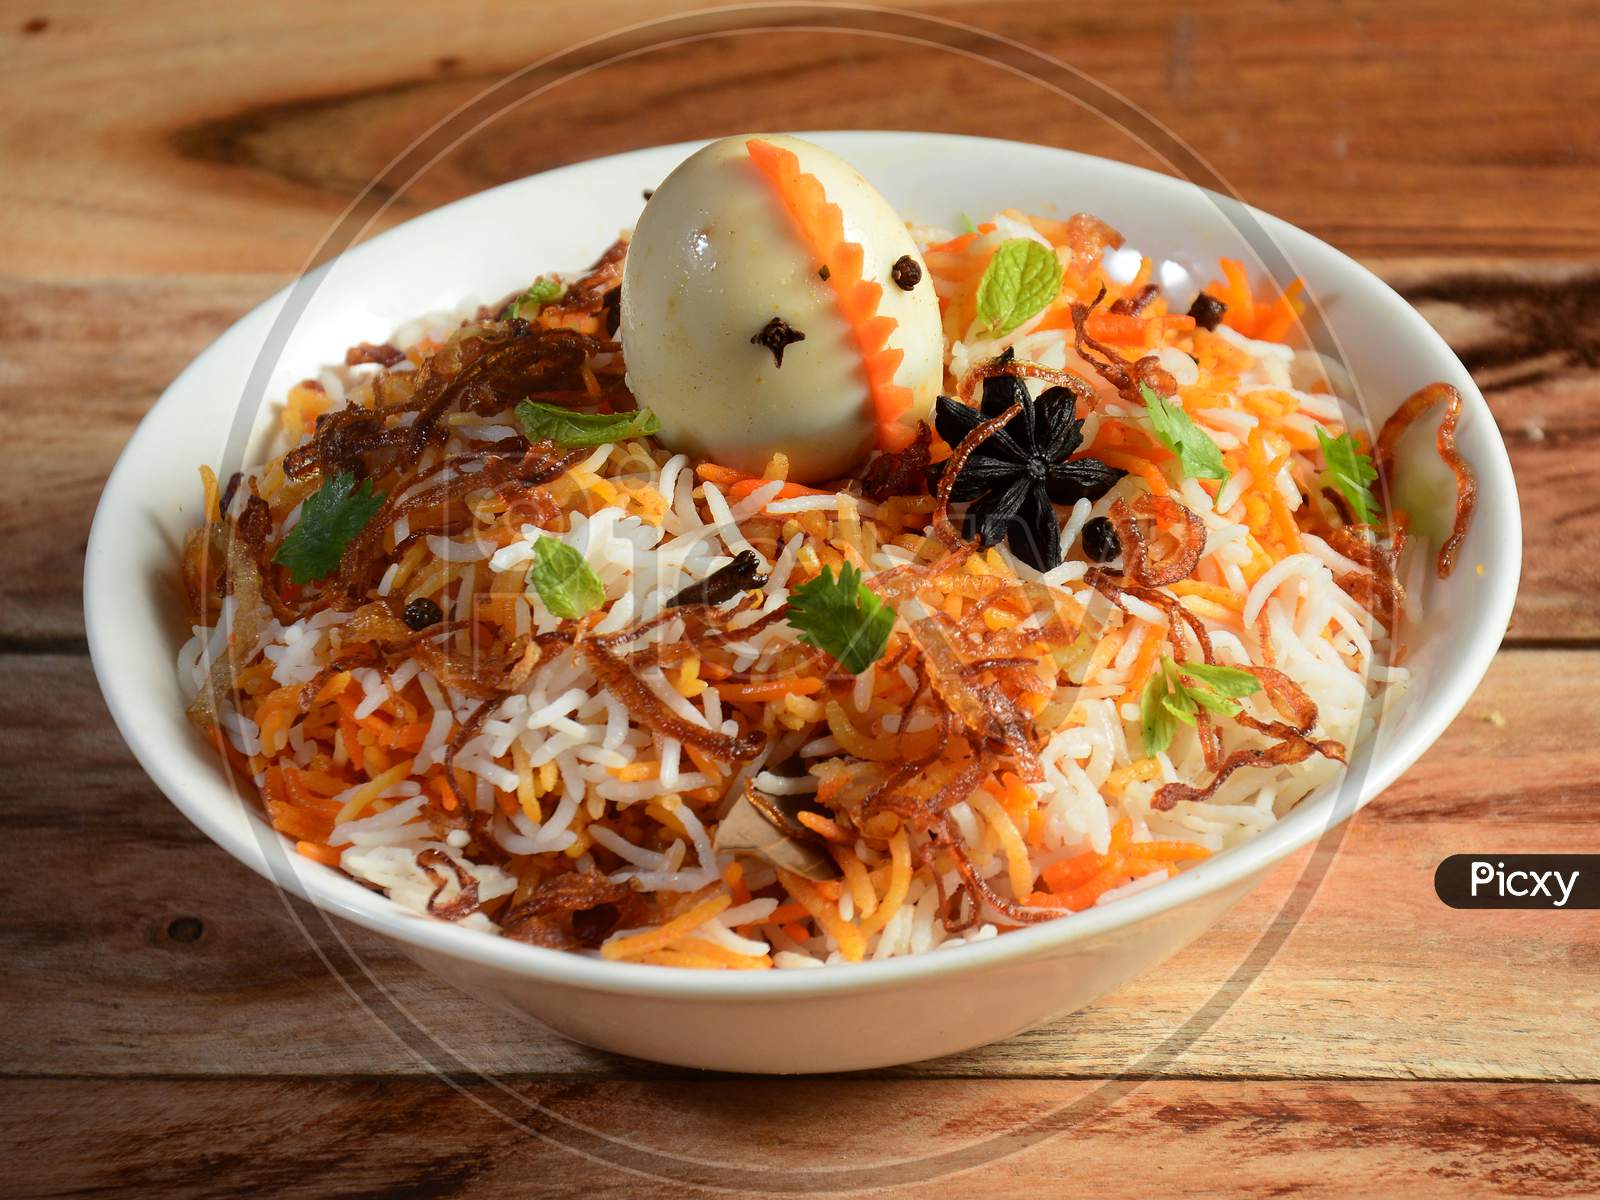 Egg Biryani - Basmati Rice Cooked With Masala And Spices And Served With Boiled Eggs, Selective Focus